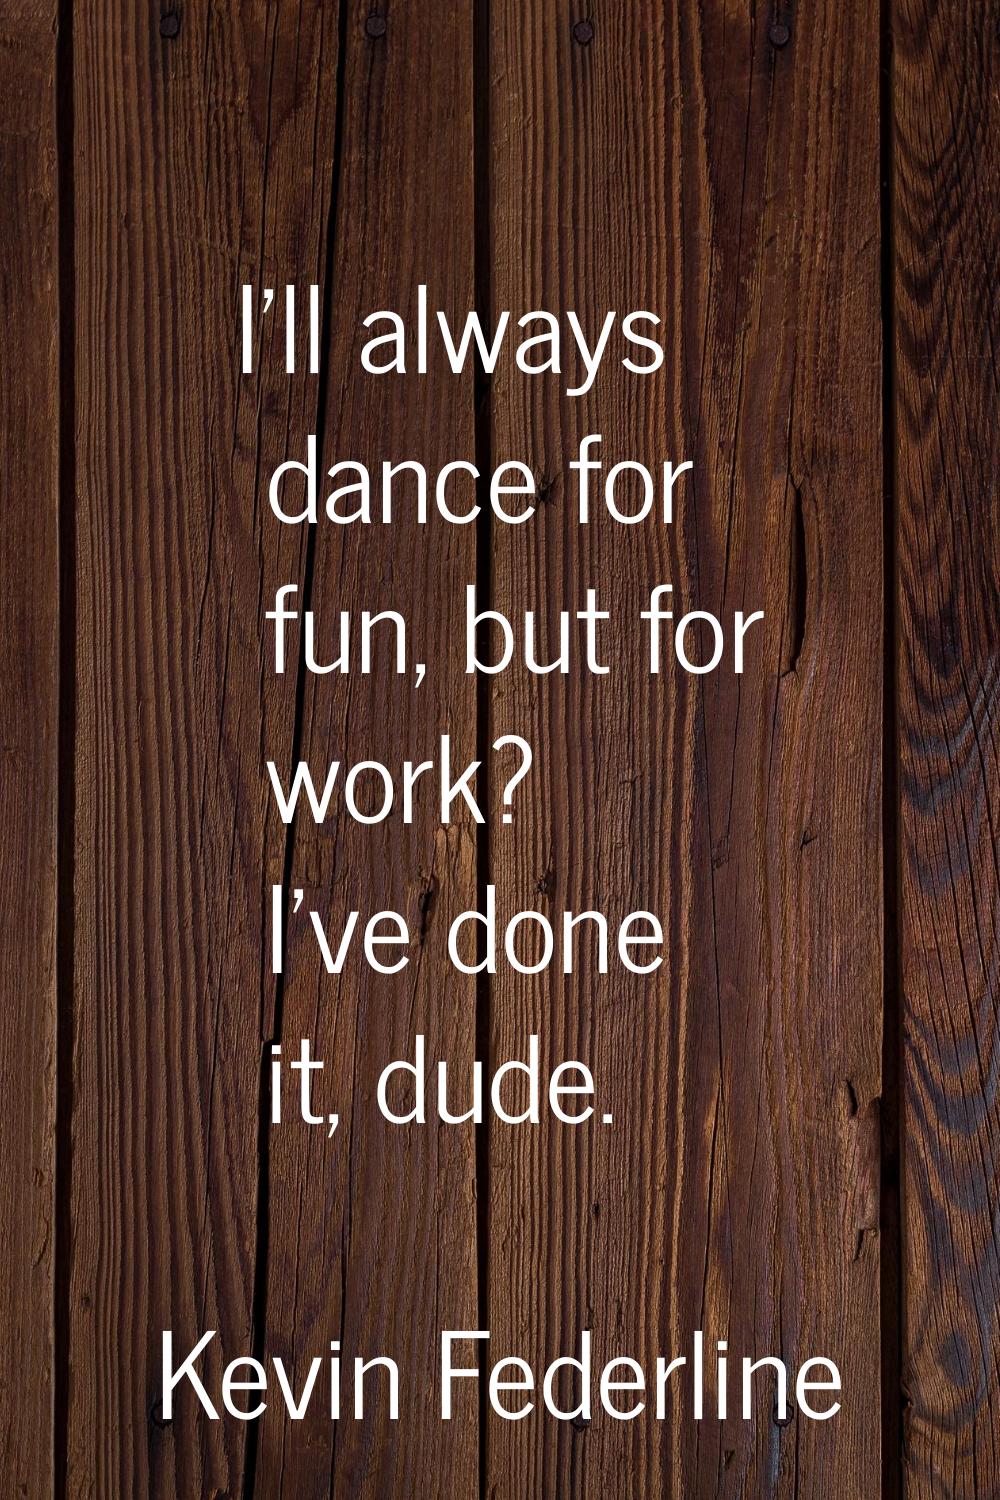 I'll always dance for fun, but for work? I've done it, dude.